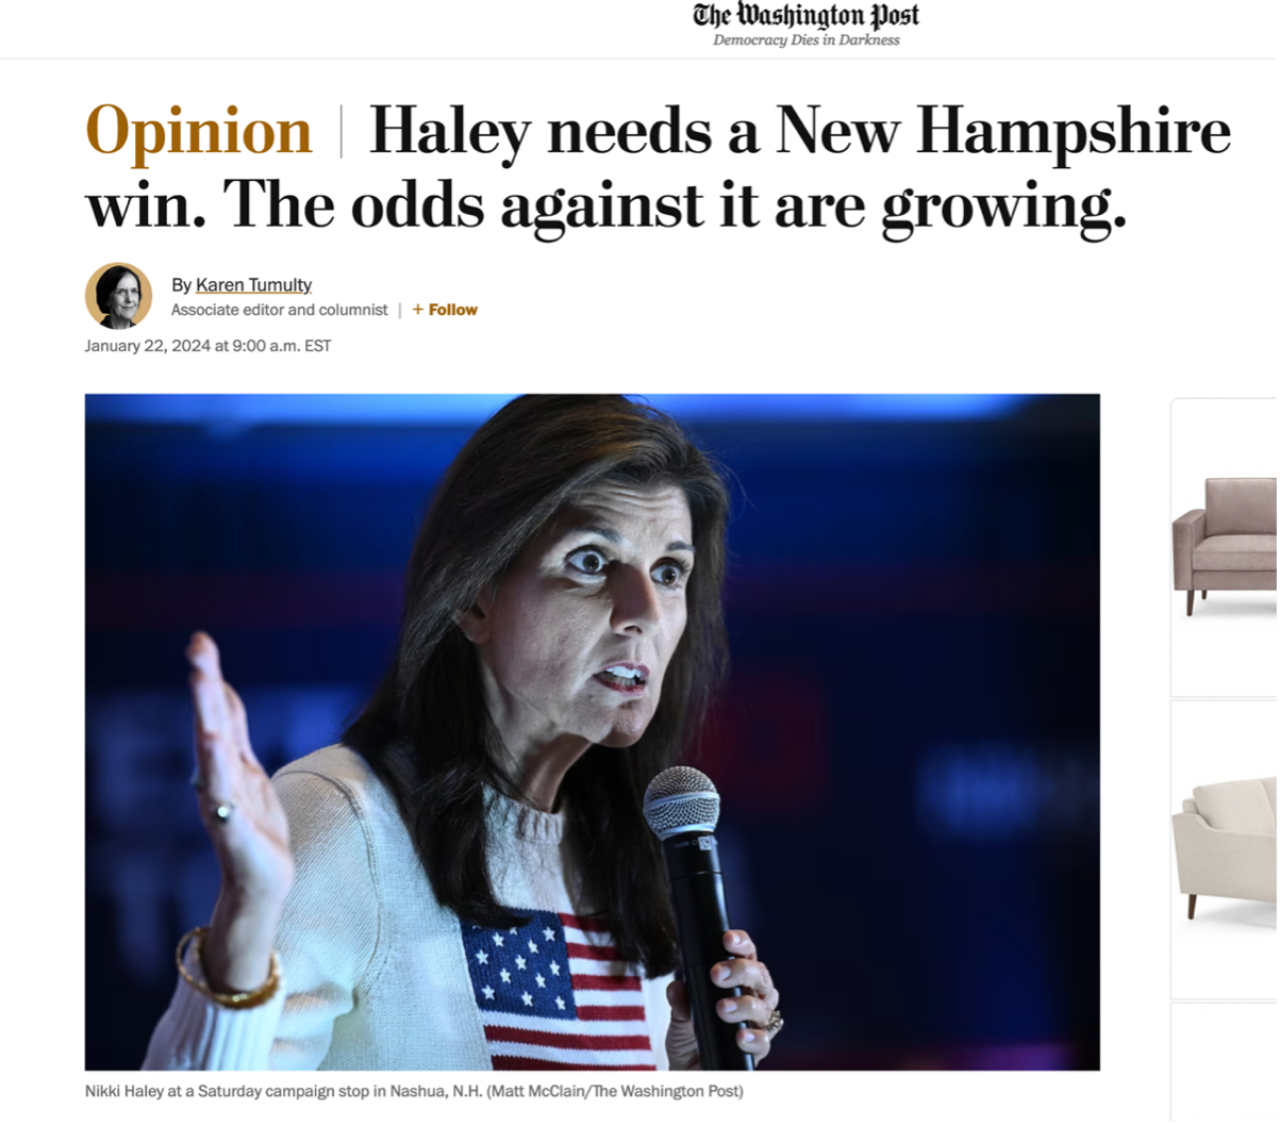 Washington Post Opinion piece titled "Haley needs a New Hampshire win. The odds against it are growing." by Karen Tumulty Jan 22, 2024.